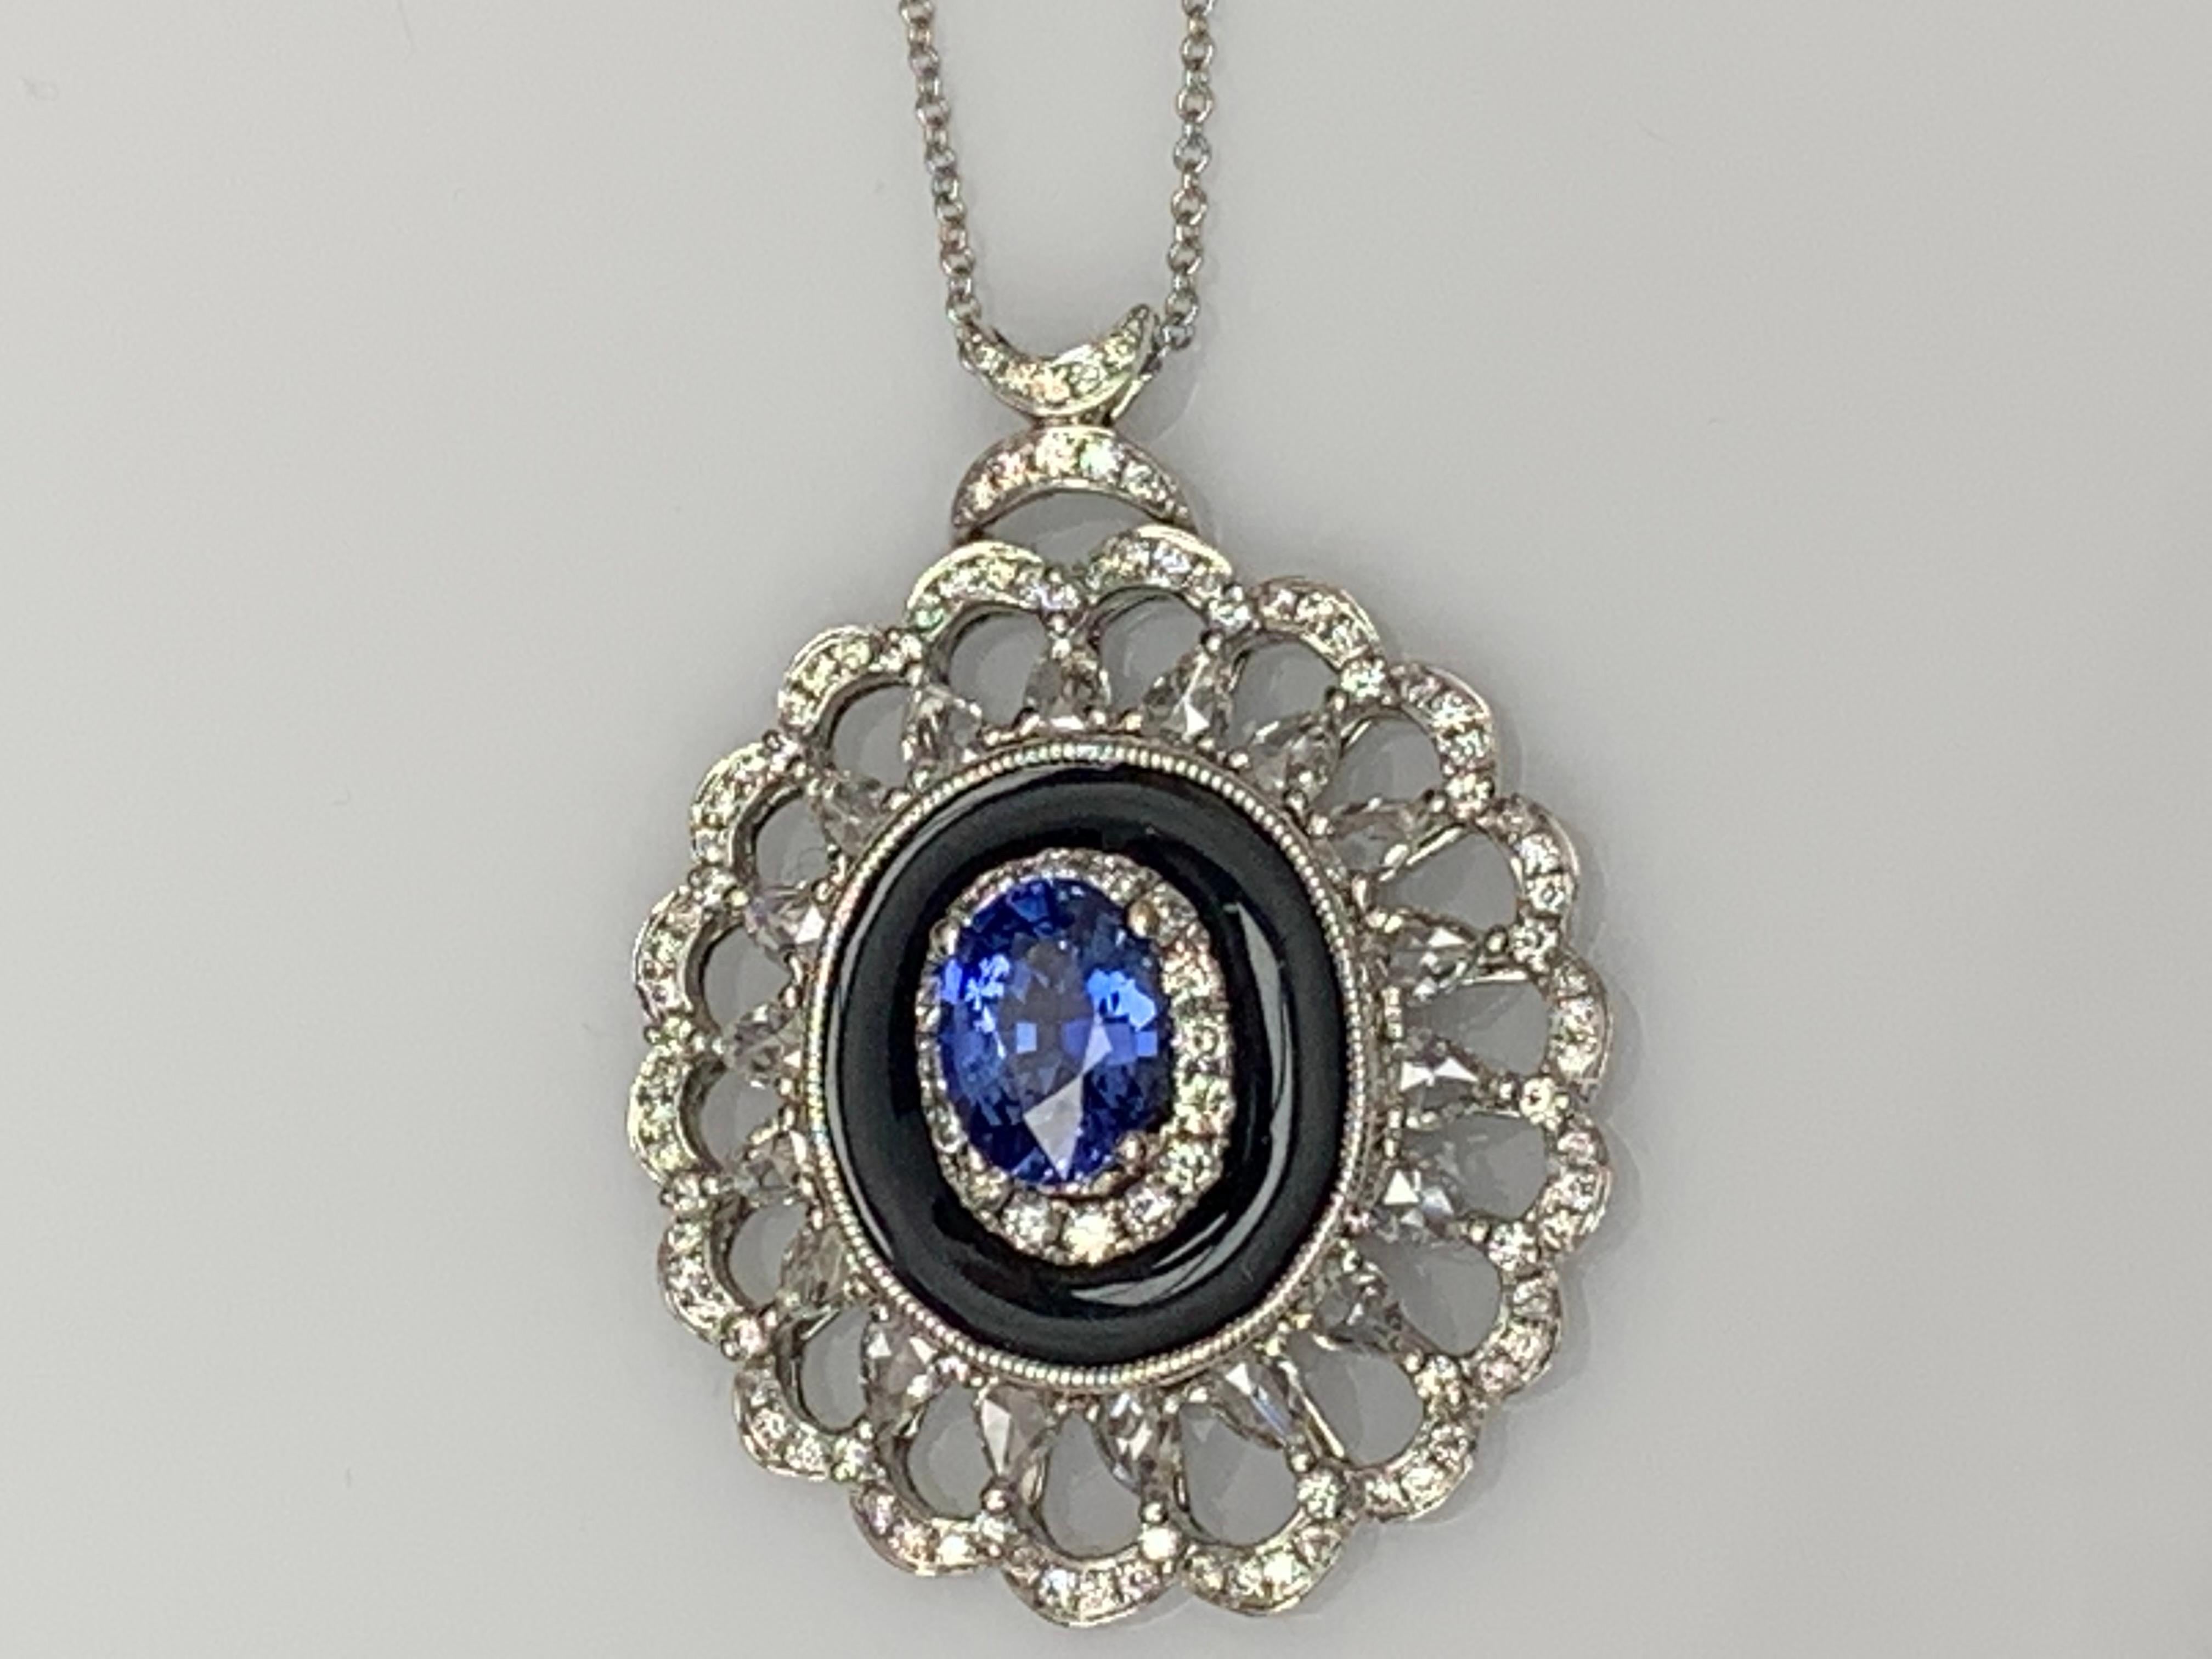 A simple floral motif pendant necklace showcasing a vibrant 1.50-carat oval cut sapphire, surrounded by black enamel and 0.94 carats of 18 accent round diamonds in an open work design. Made in 18 karats white gold.

Style is available in different